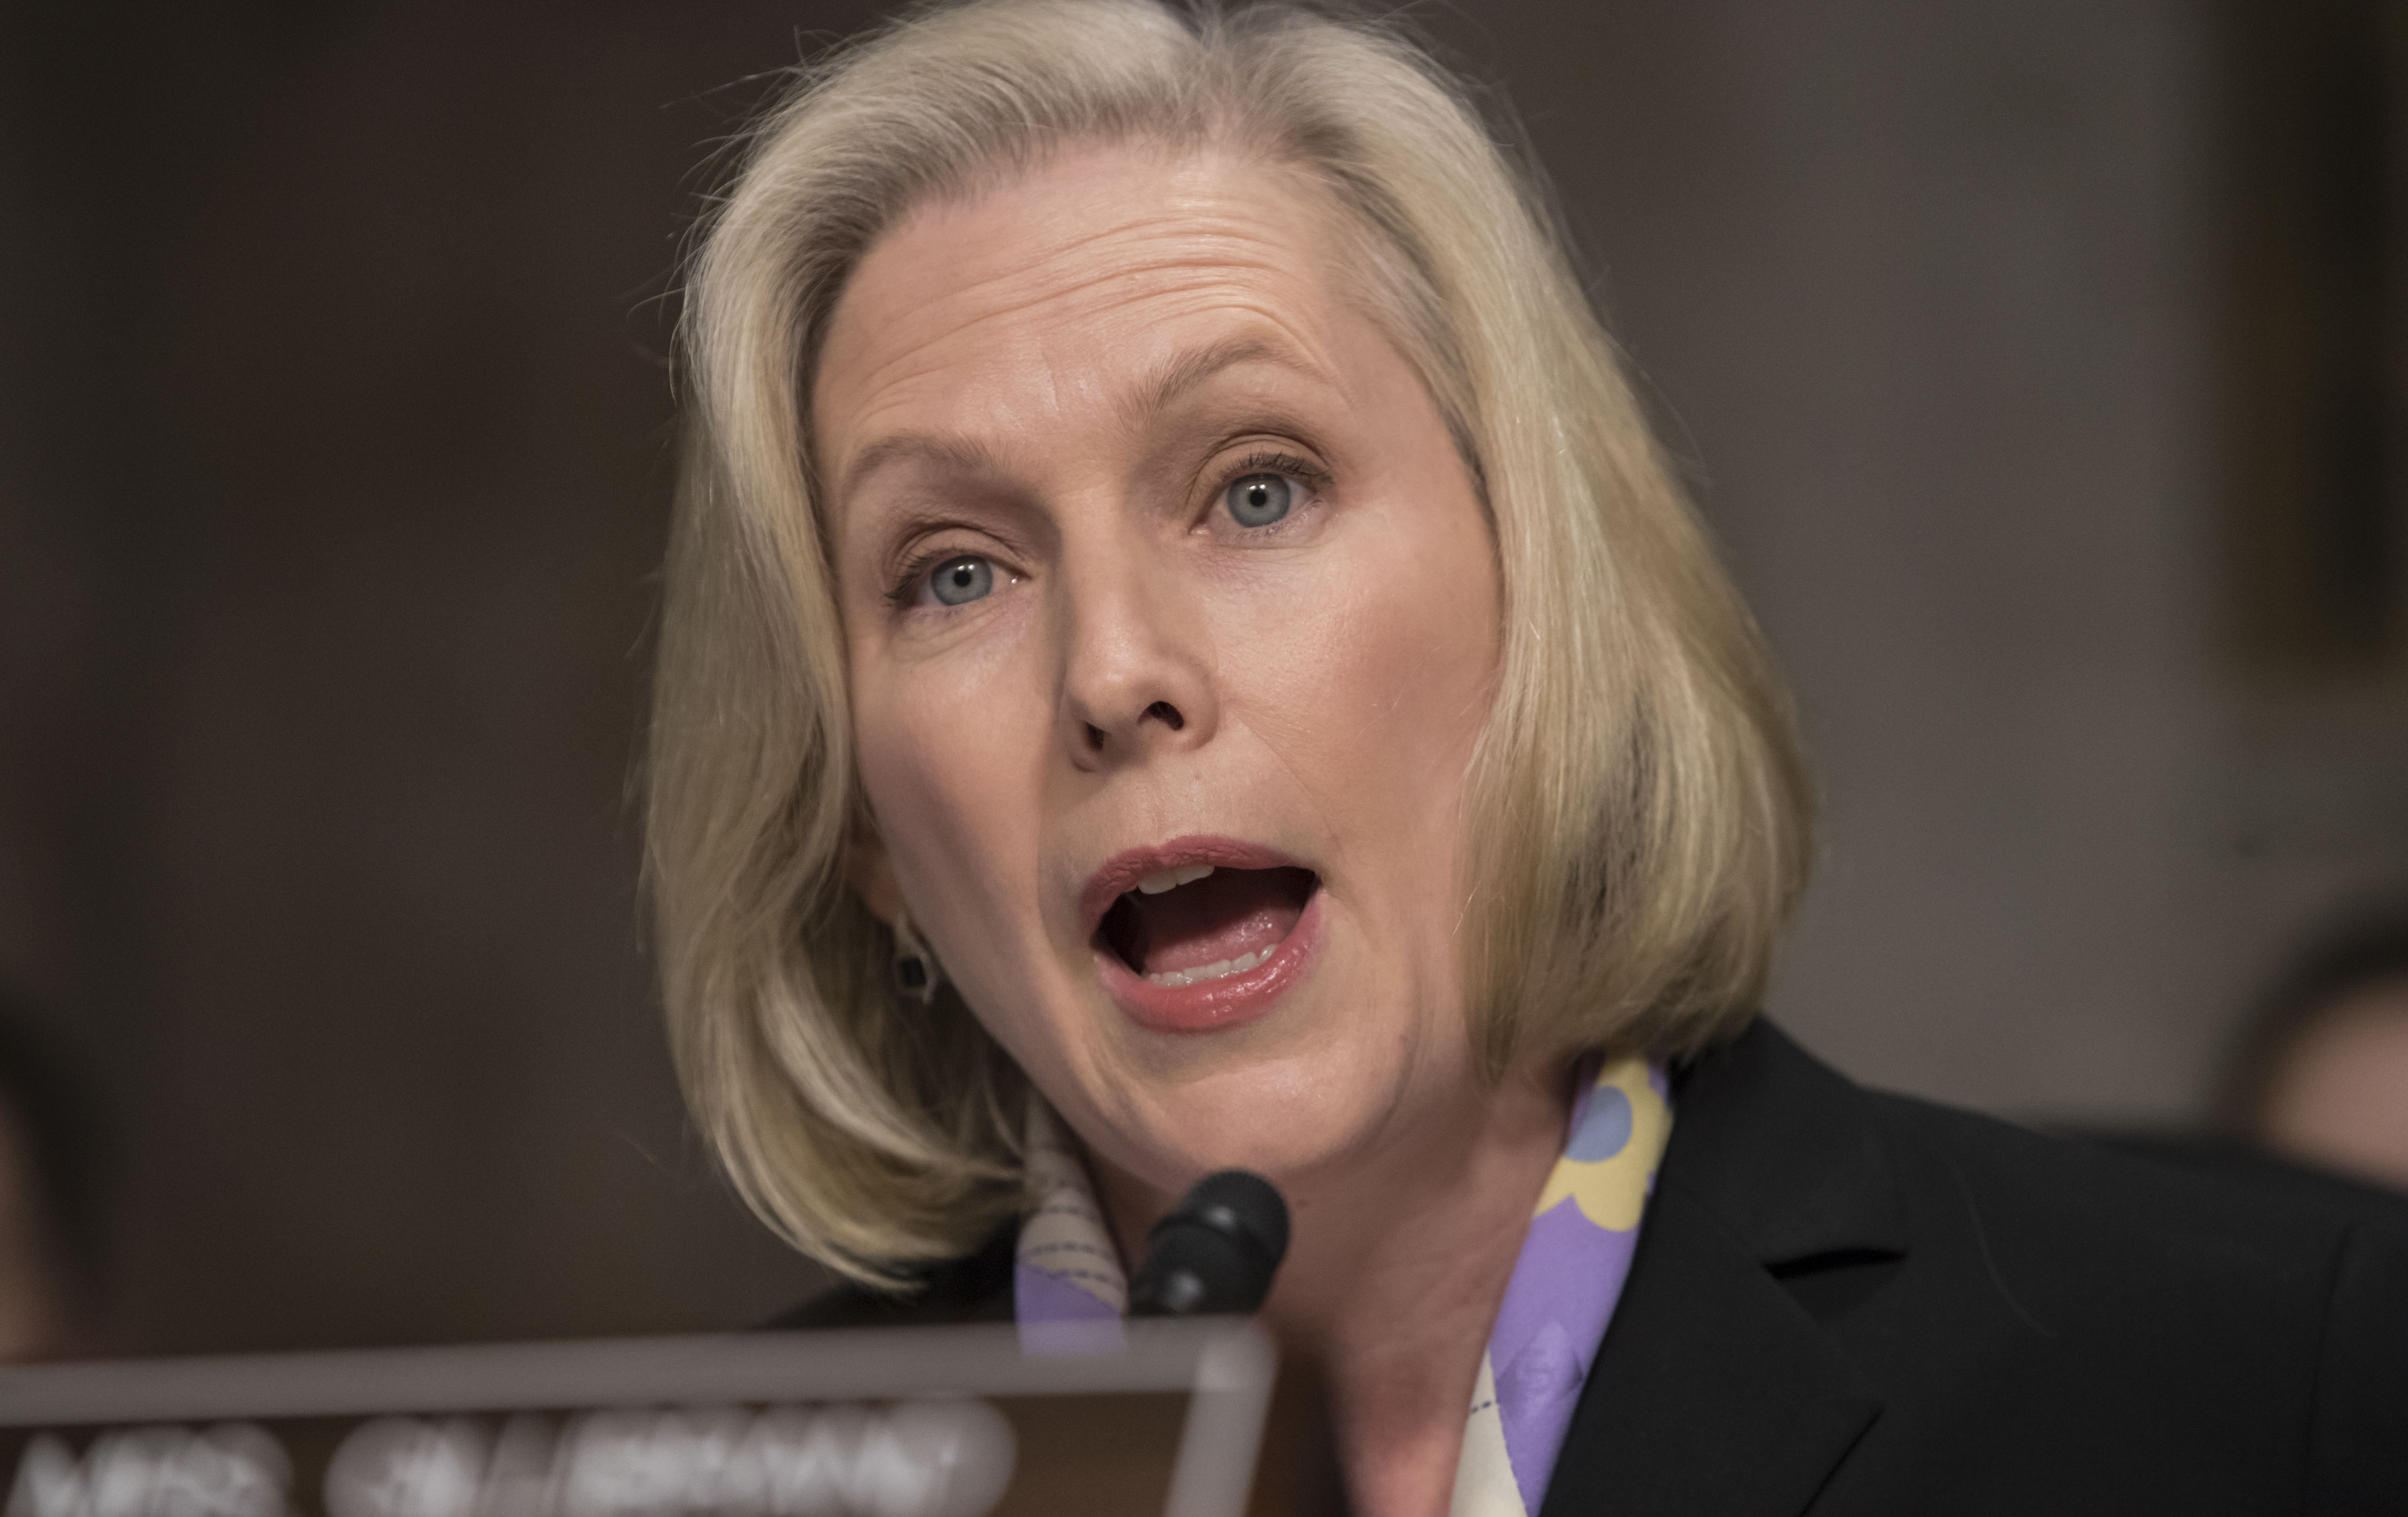 Kirsten Gillibrand Just Gave a Principled Defense of Civilian Control of the Military